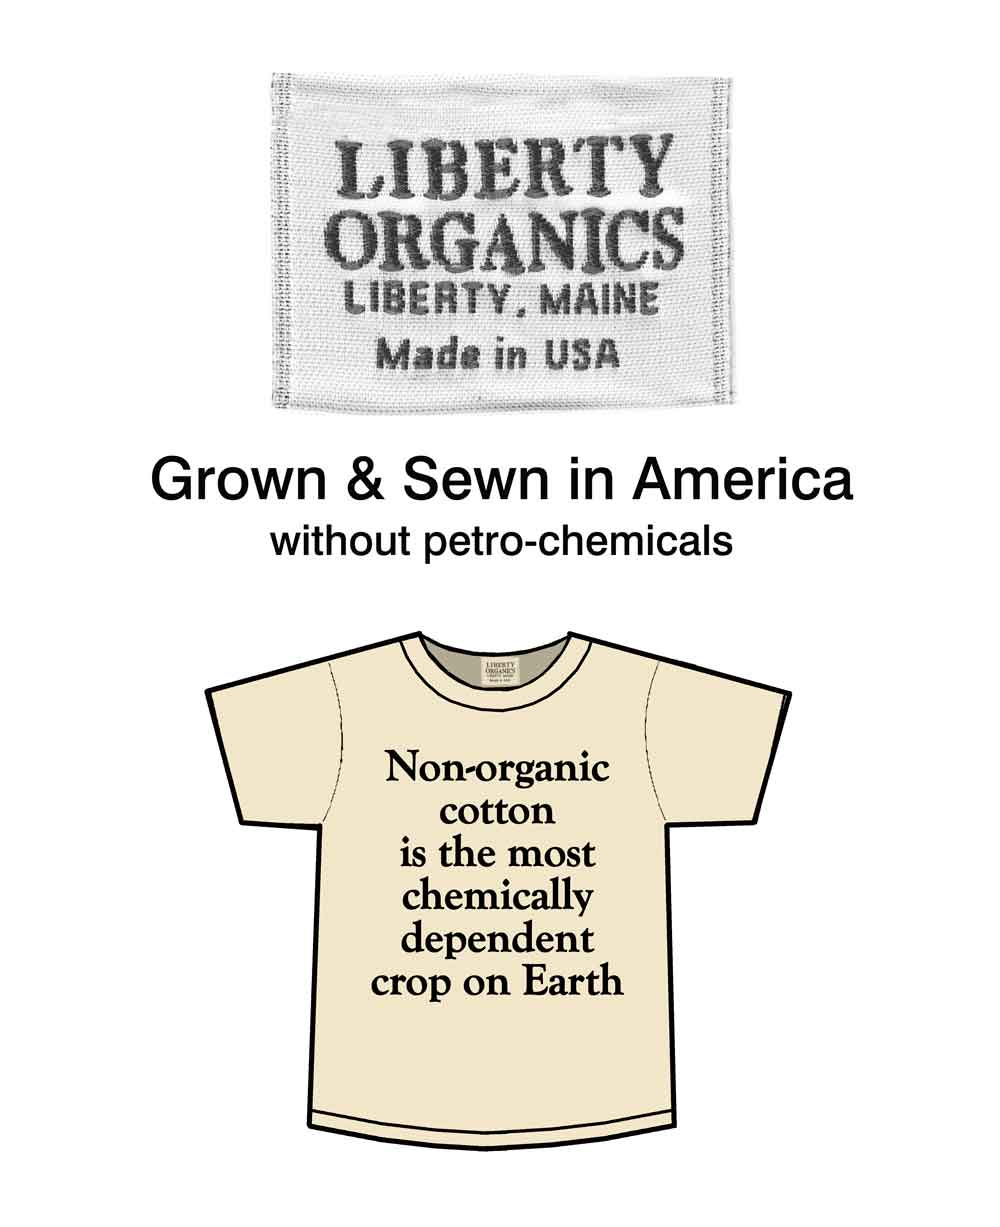 liberty organics liberty, Maine made in USA grown and sewn in America without petrochemicals. Non-organic cotton is the most chemically-dependent crop on Earth.